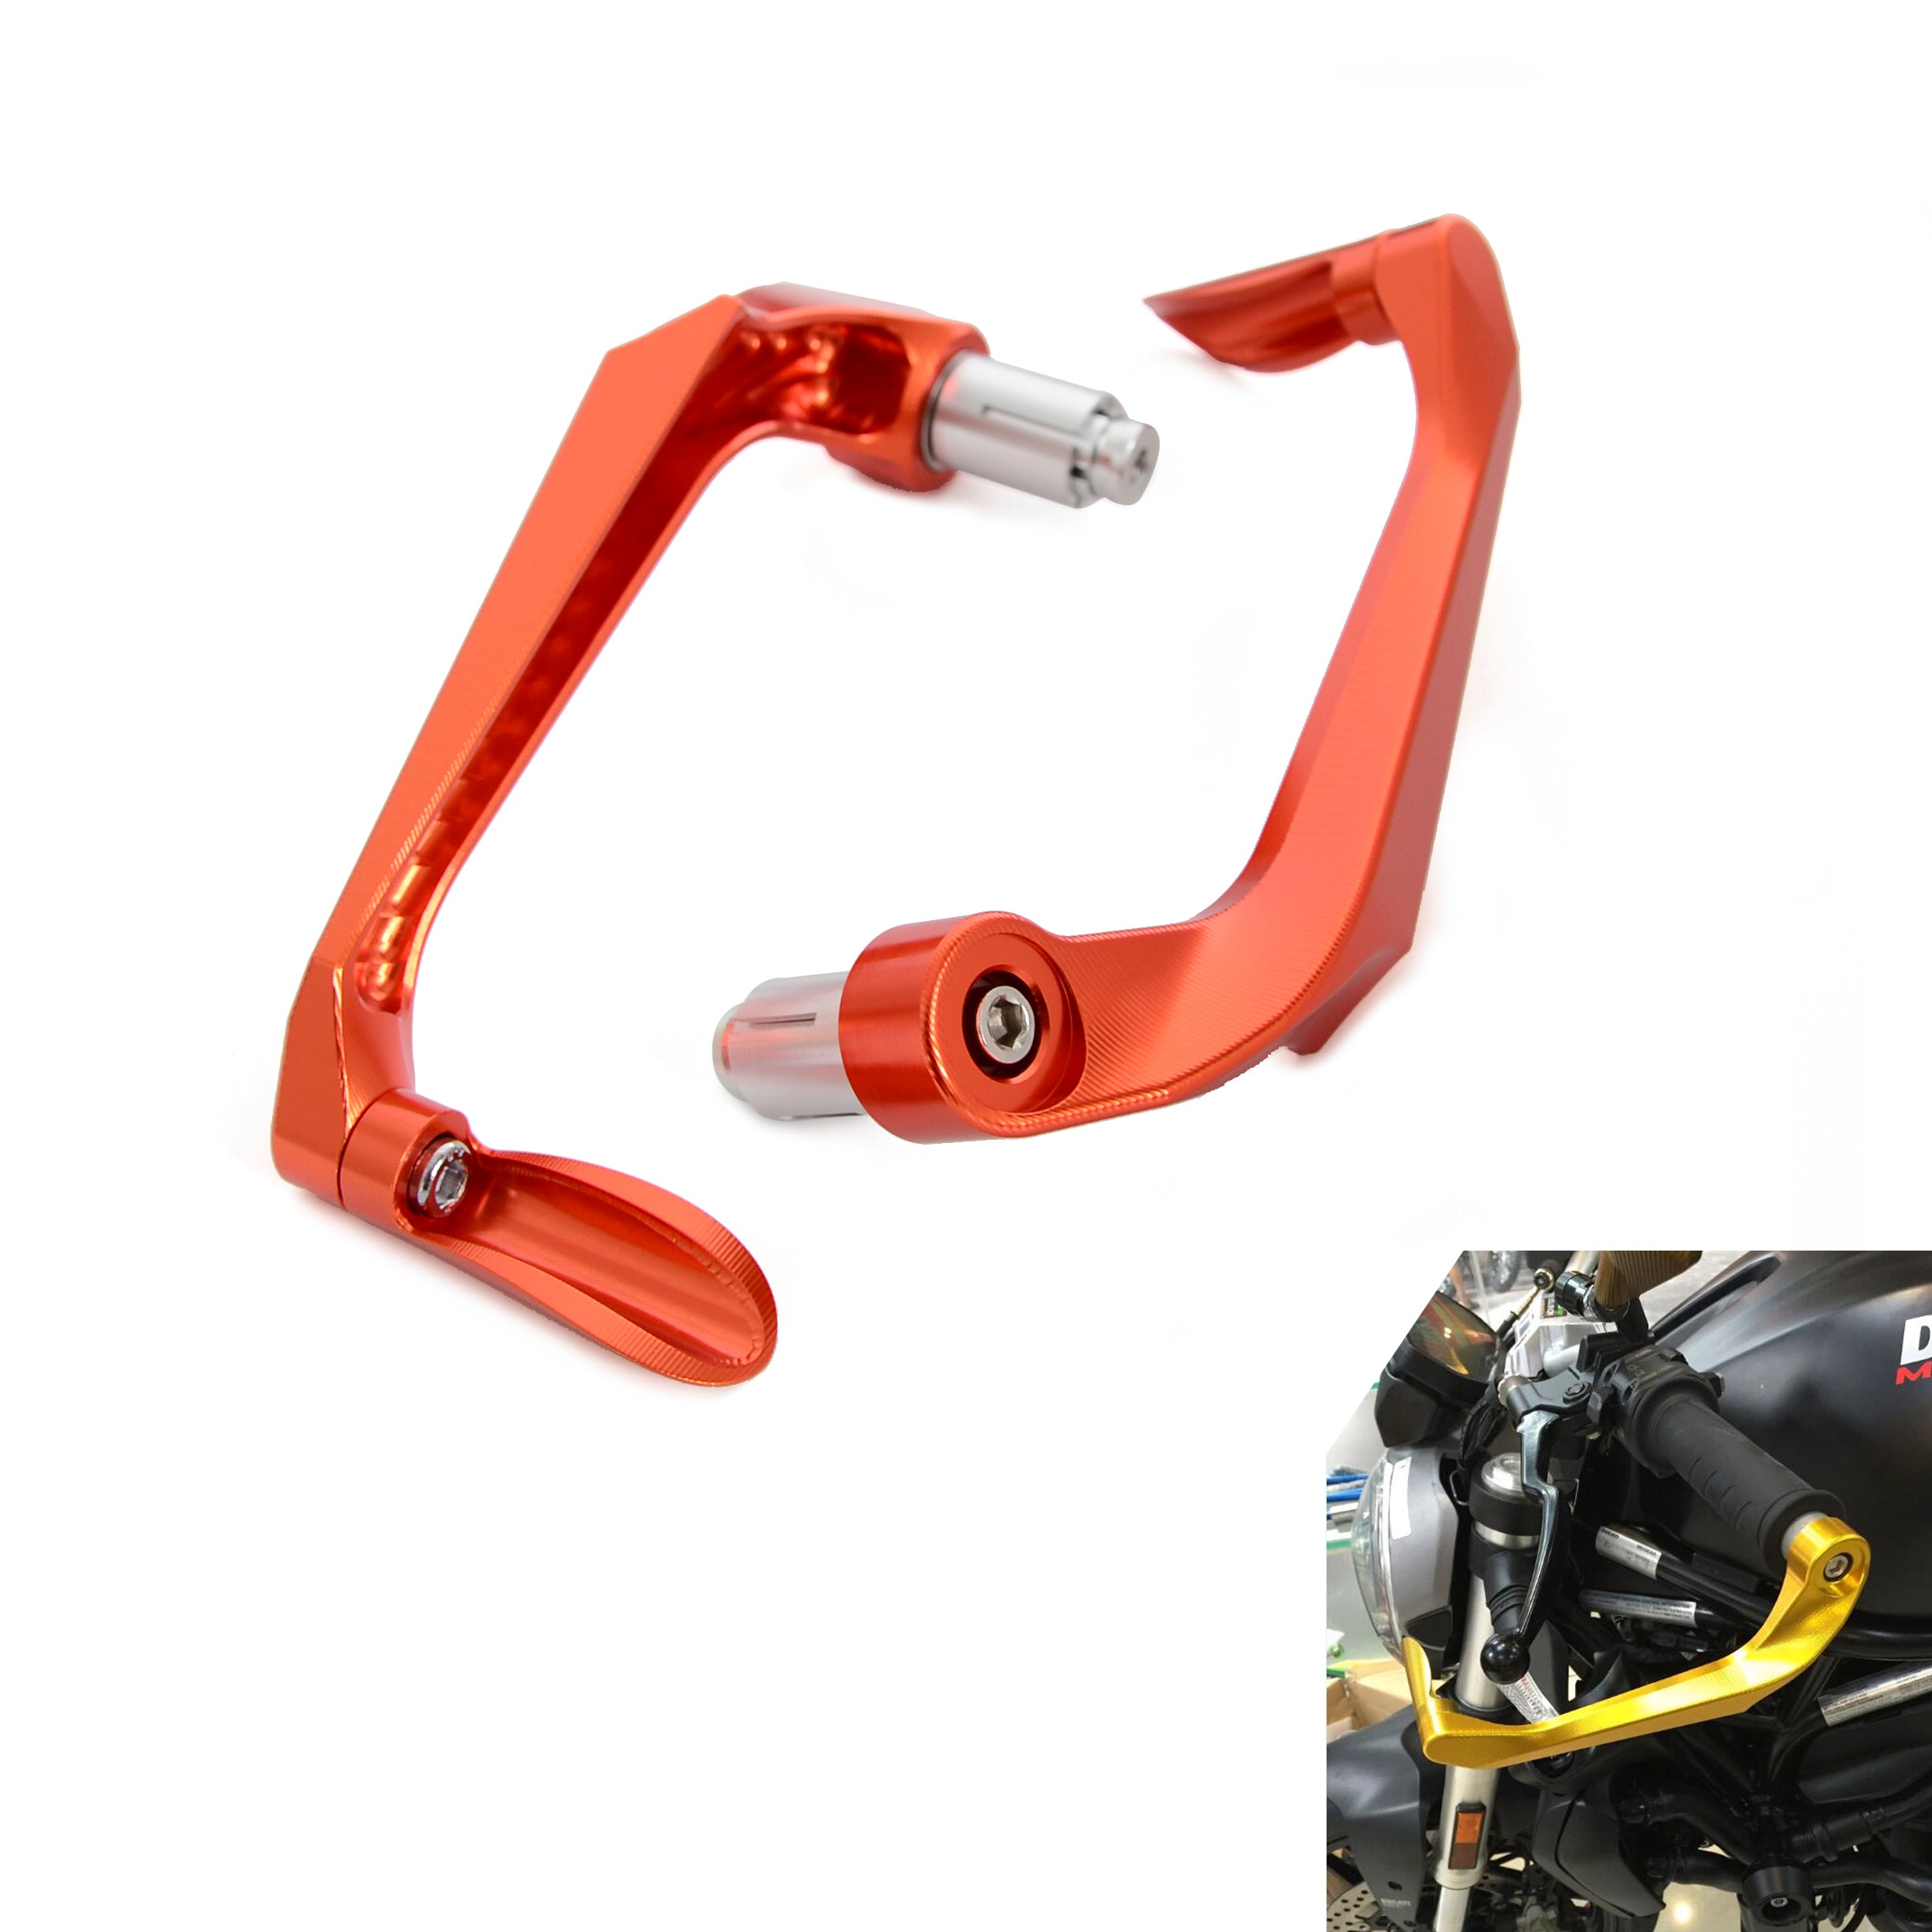 Brake Clutch Lever Guard Bar End Protector Universial for Motorcycle 7/8" Handle